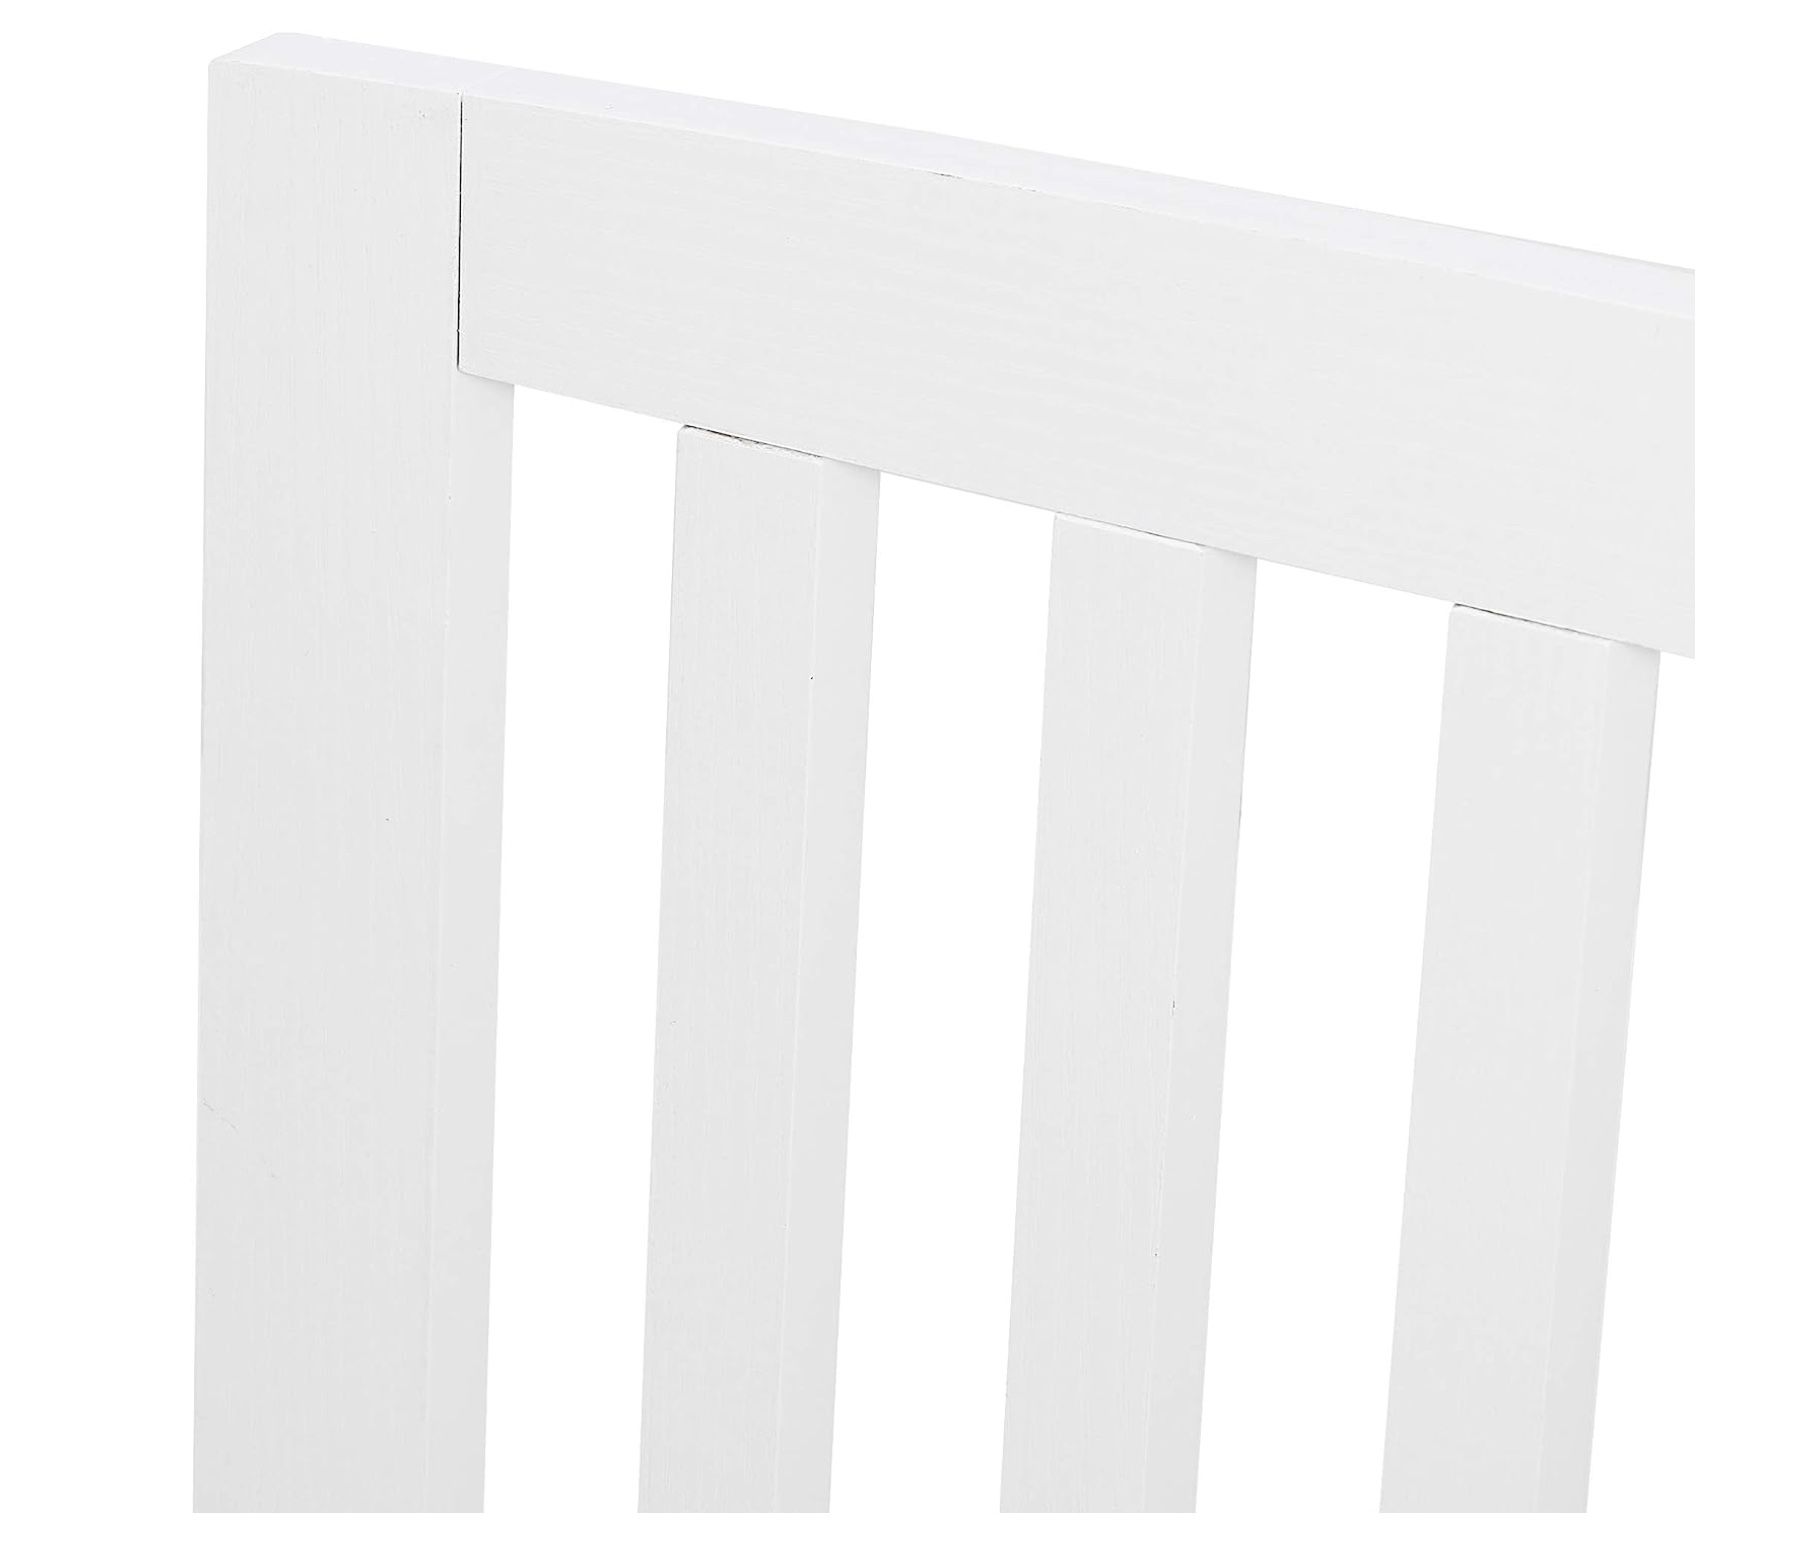 2 Freestanding Pet Dog Gate Foldable 24 Inch for House  Wooden Dog Fence 4 Panels (White)